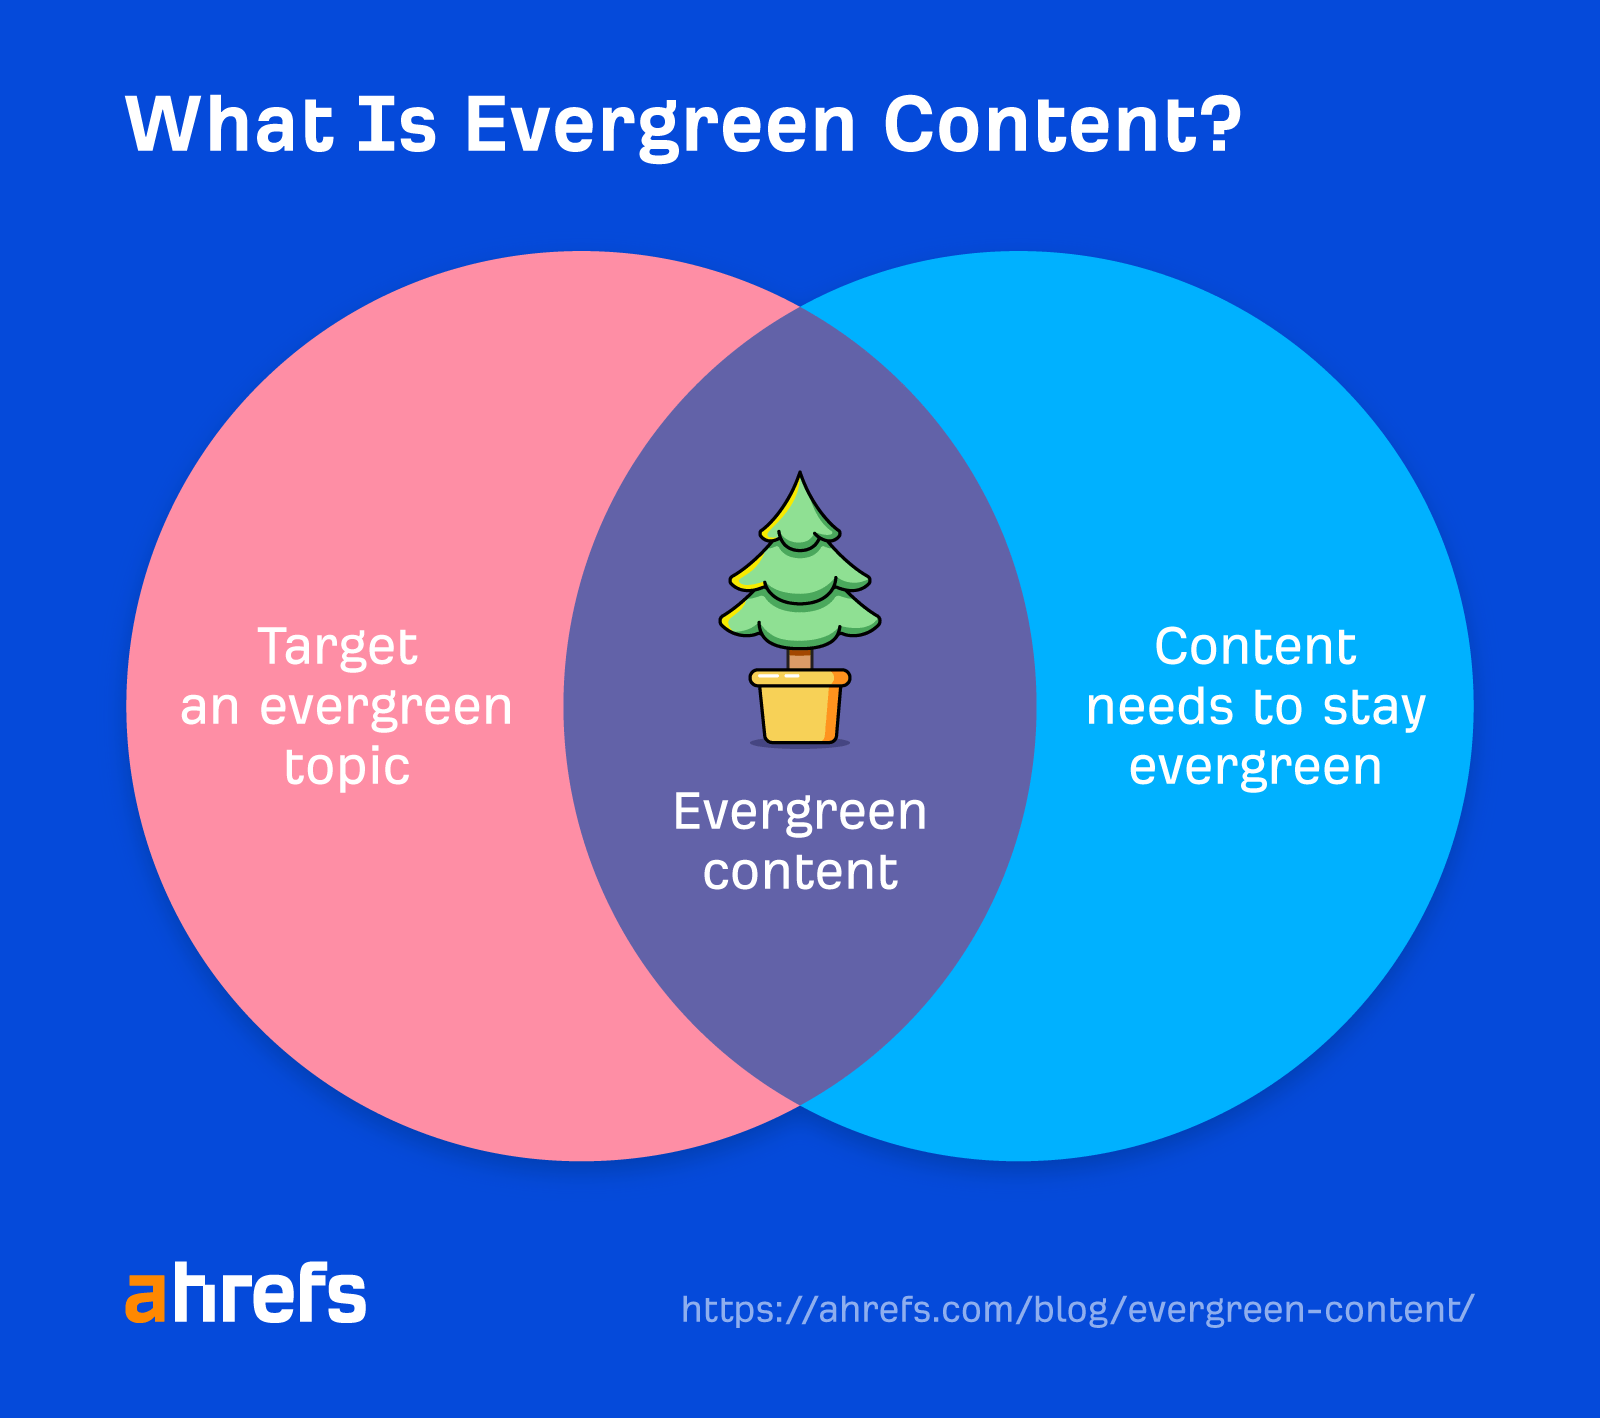 The two criteria of evergreen content